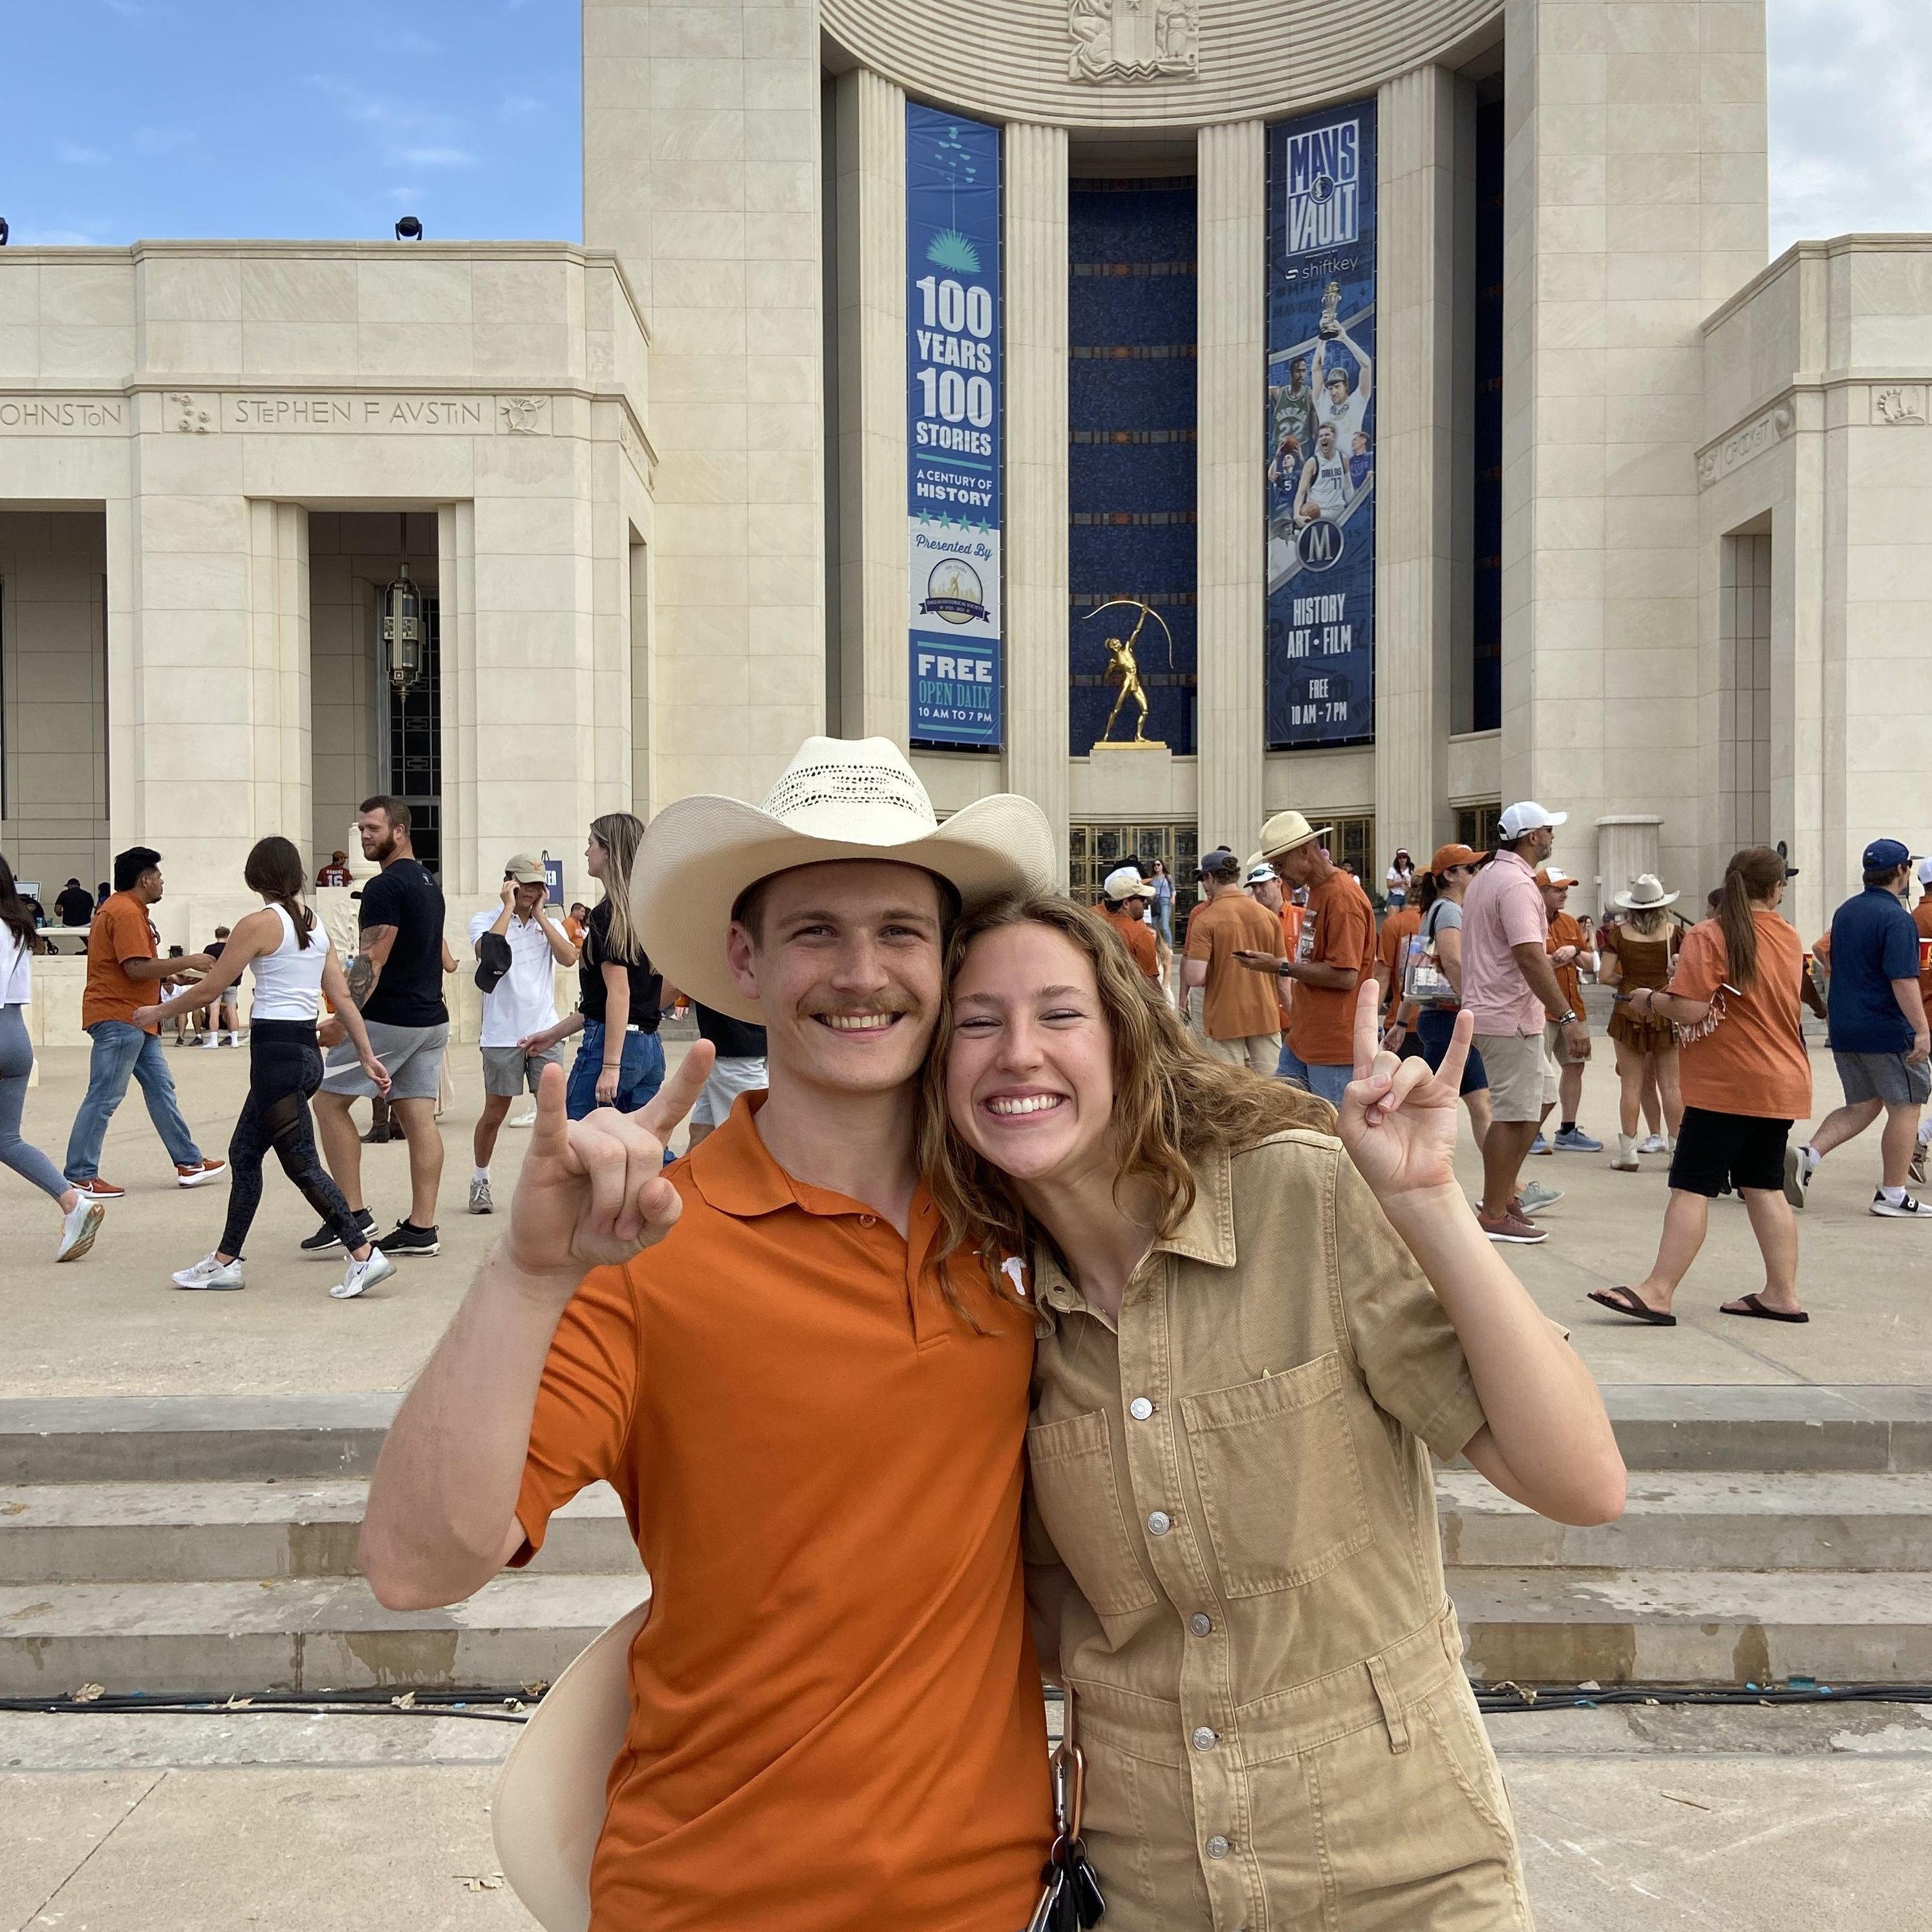 Recreating the picture where we first met four years later! Hook em!